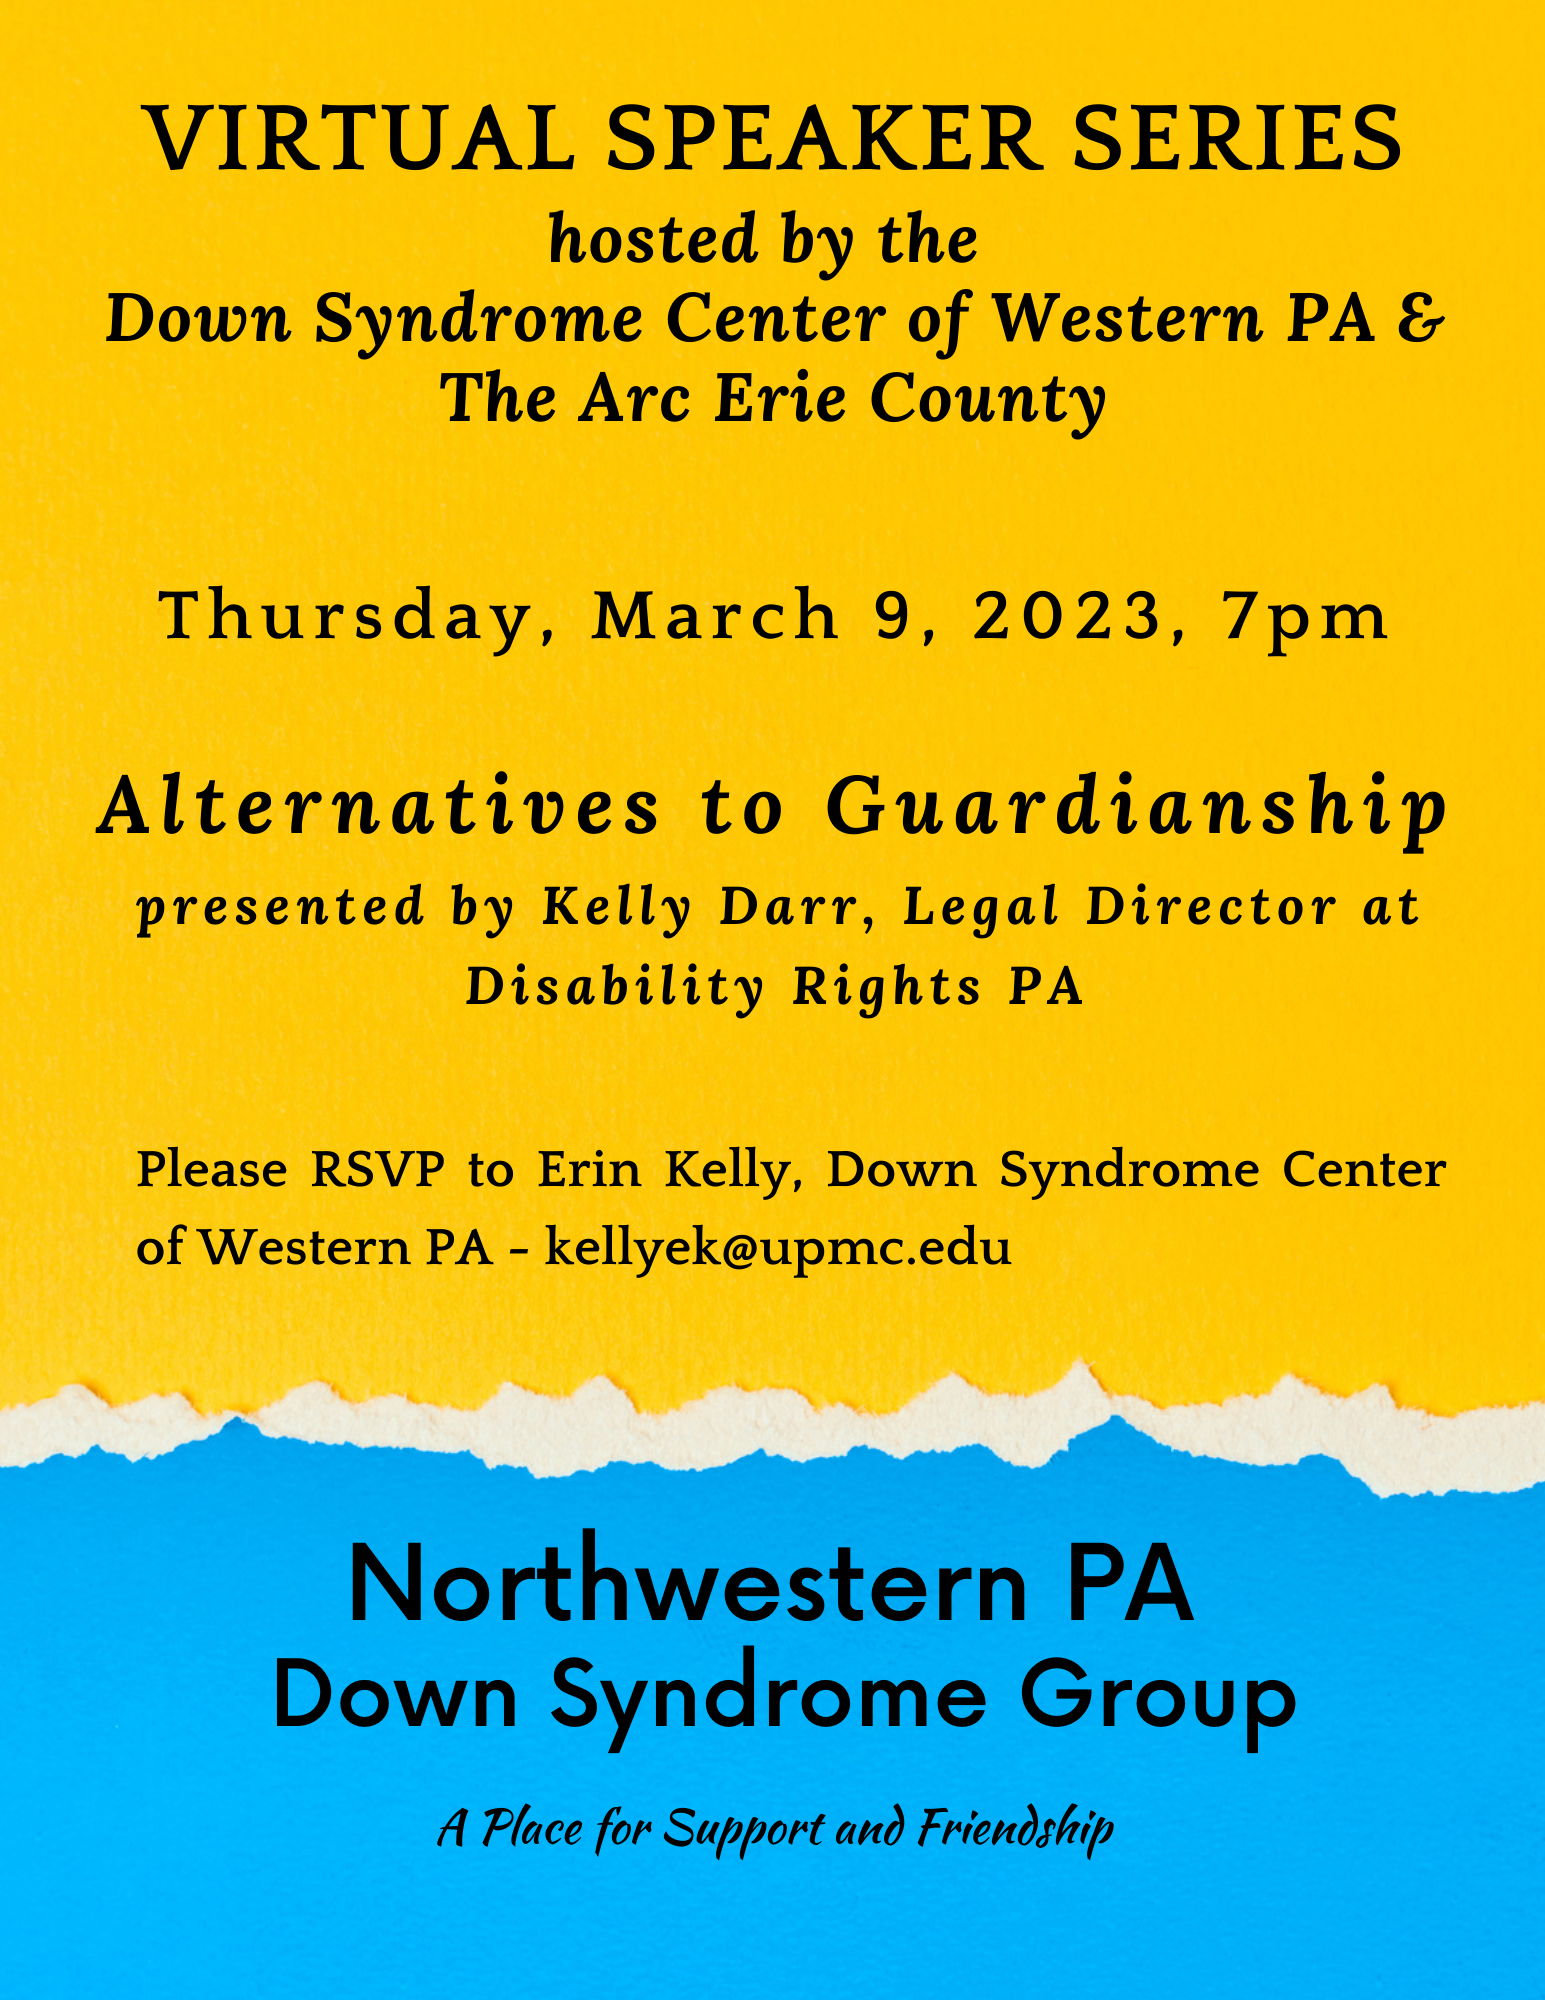 Virtual Speaker Series hosted by the Down Syndrome Center of Western PA and Arc of Erie County Alternative to Guardianship presented by Kelly Darr, Legal director at Disability Rights PA 